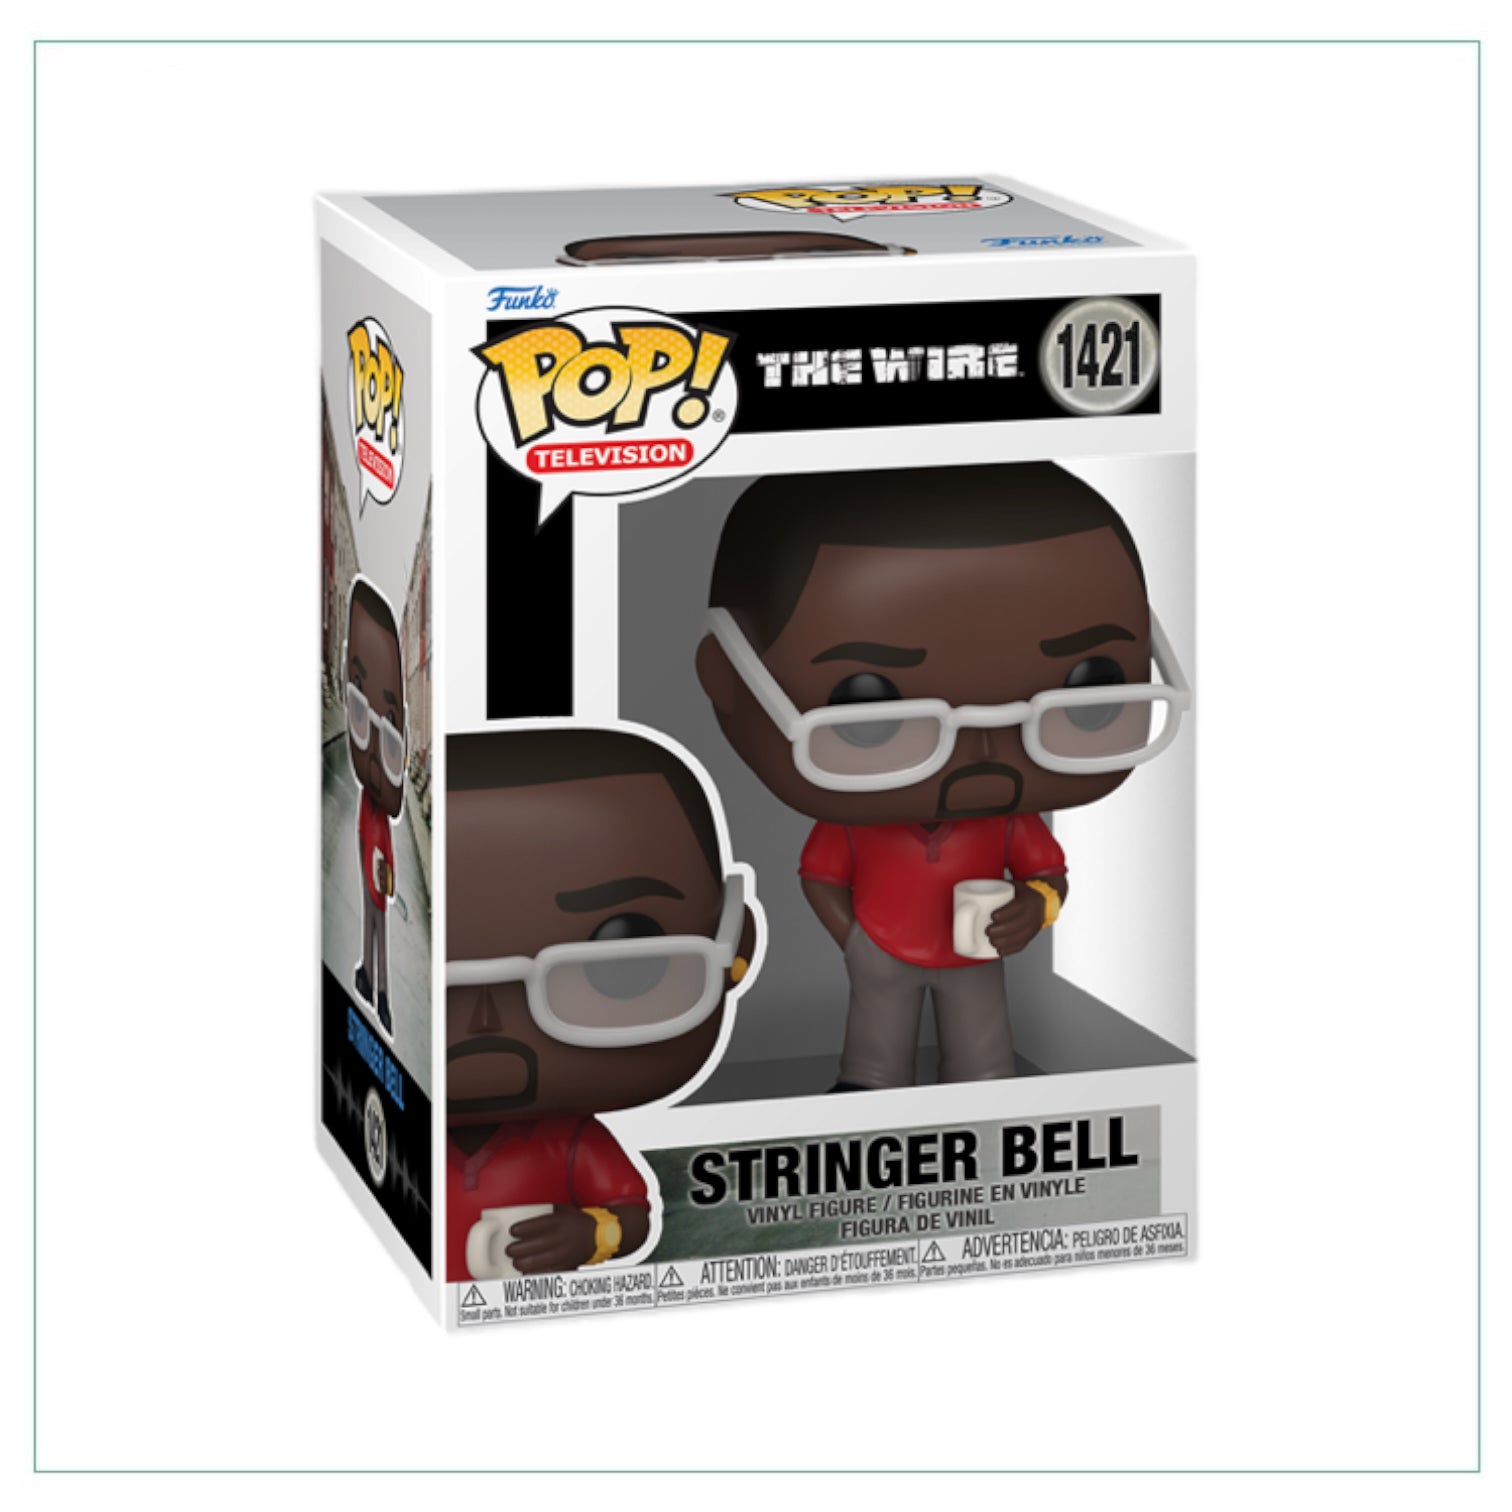 Stringer Bell #1421  Funko Pop! The Wire - PREORDER